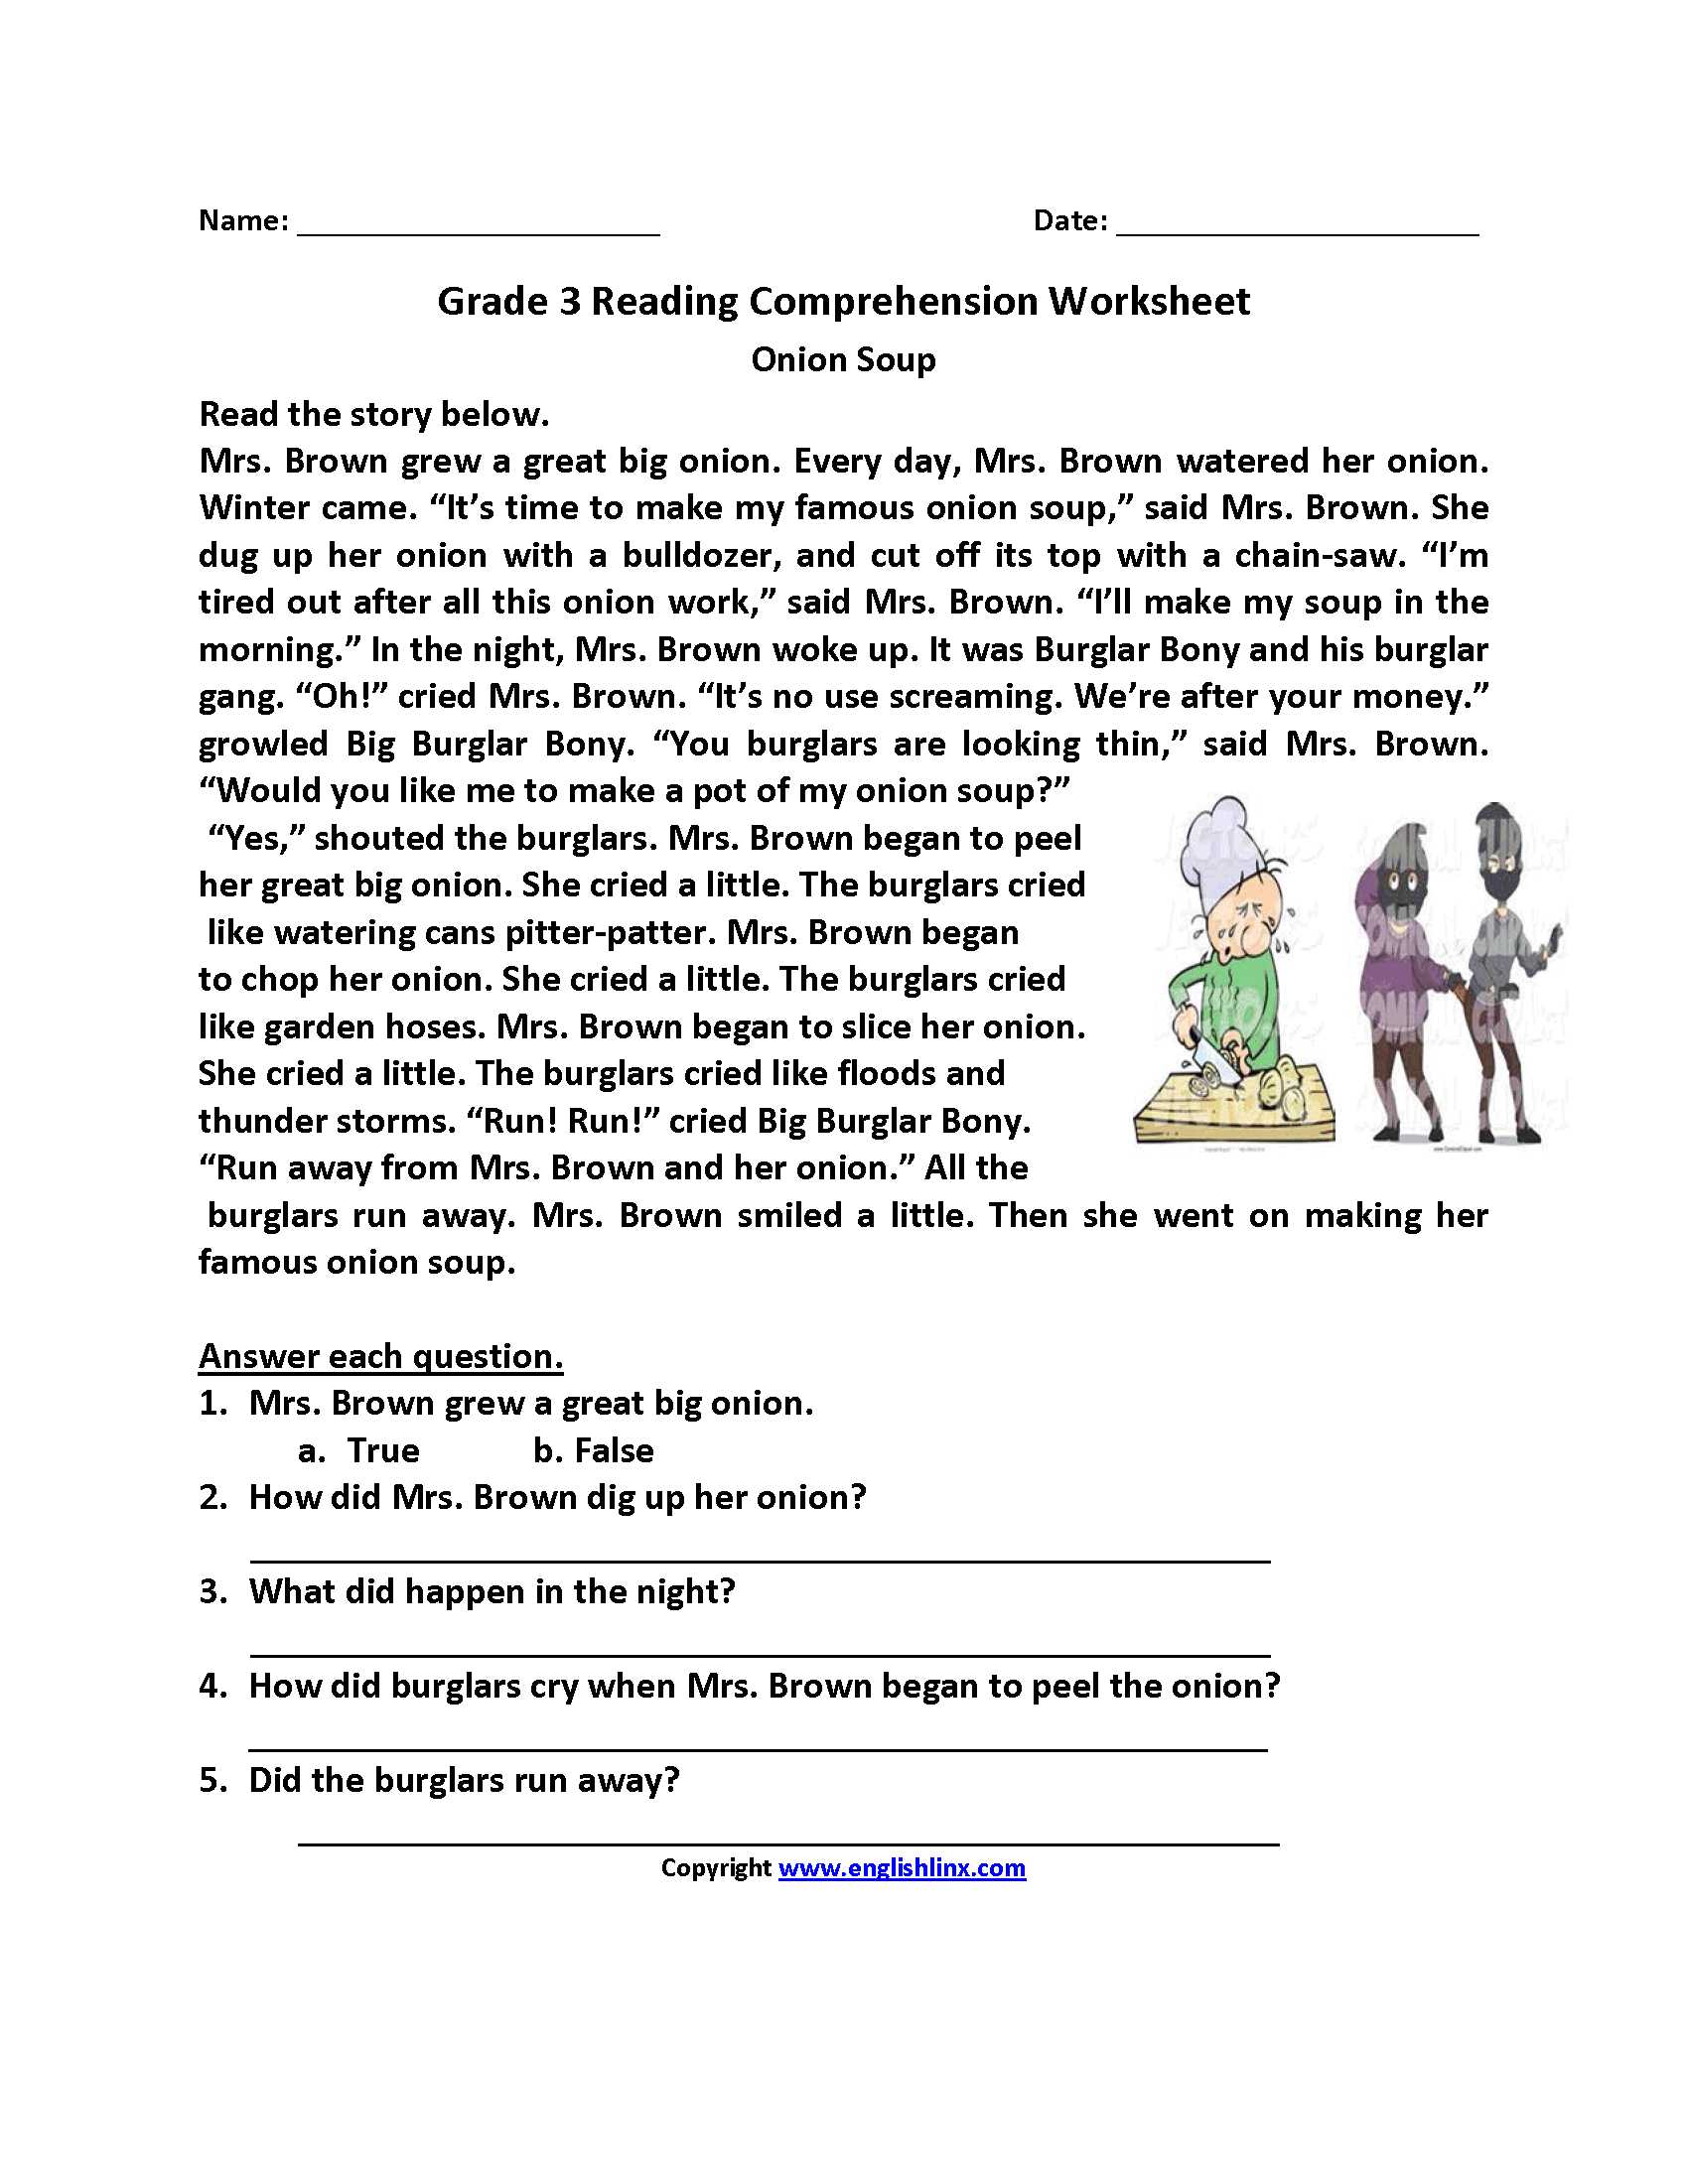 Drawing Conclusions Worksheets 3rd Grade together with Third Grade Reading Worksheets the Best Worksheets Image Collection